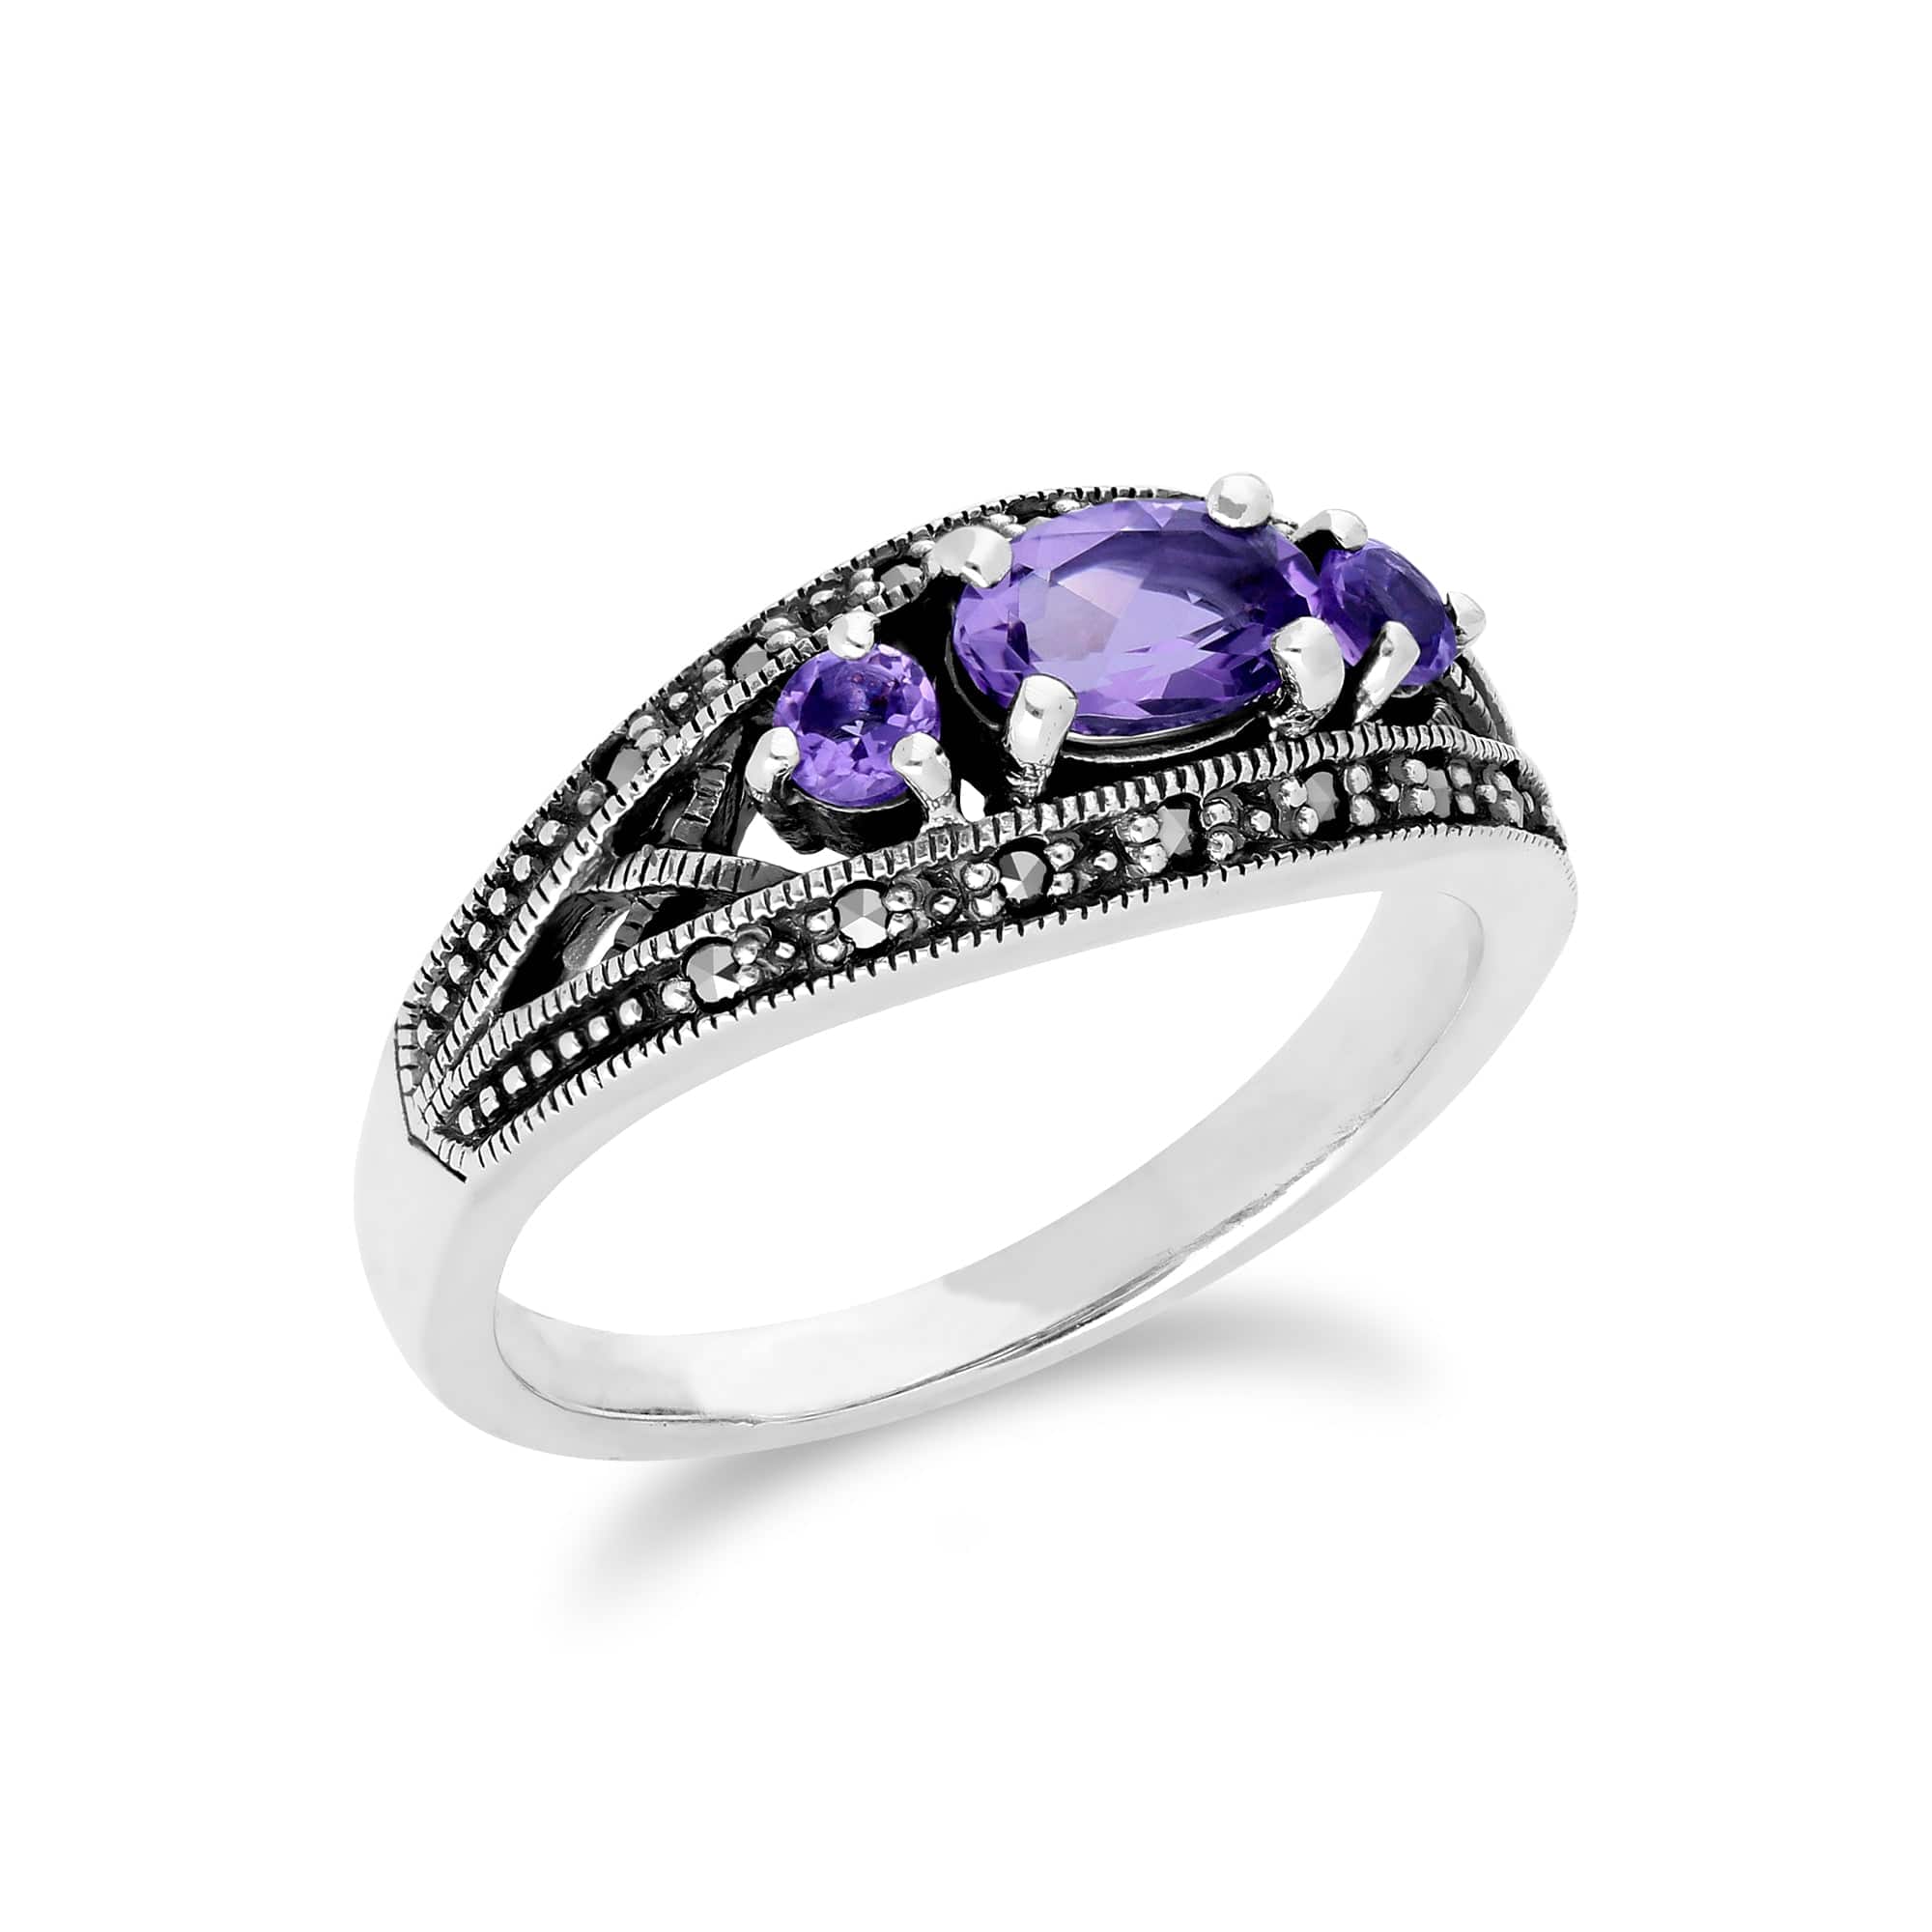 214R424001925 Art Deco Style Oval Amethyst & Marcasite Three Stone Ring in 925 Sterling Silver 2